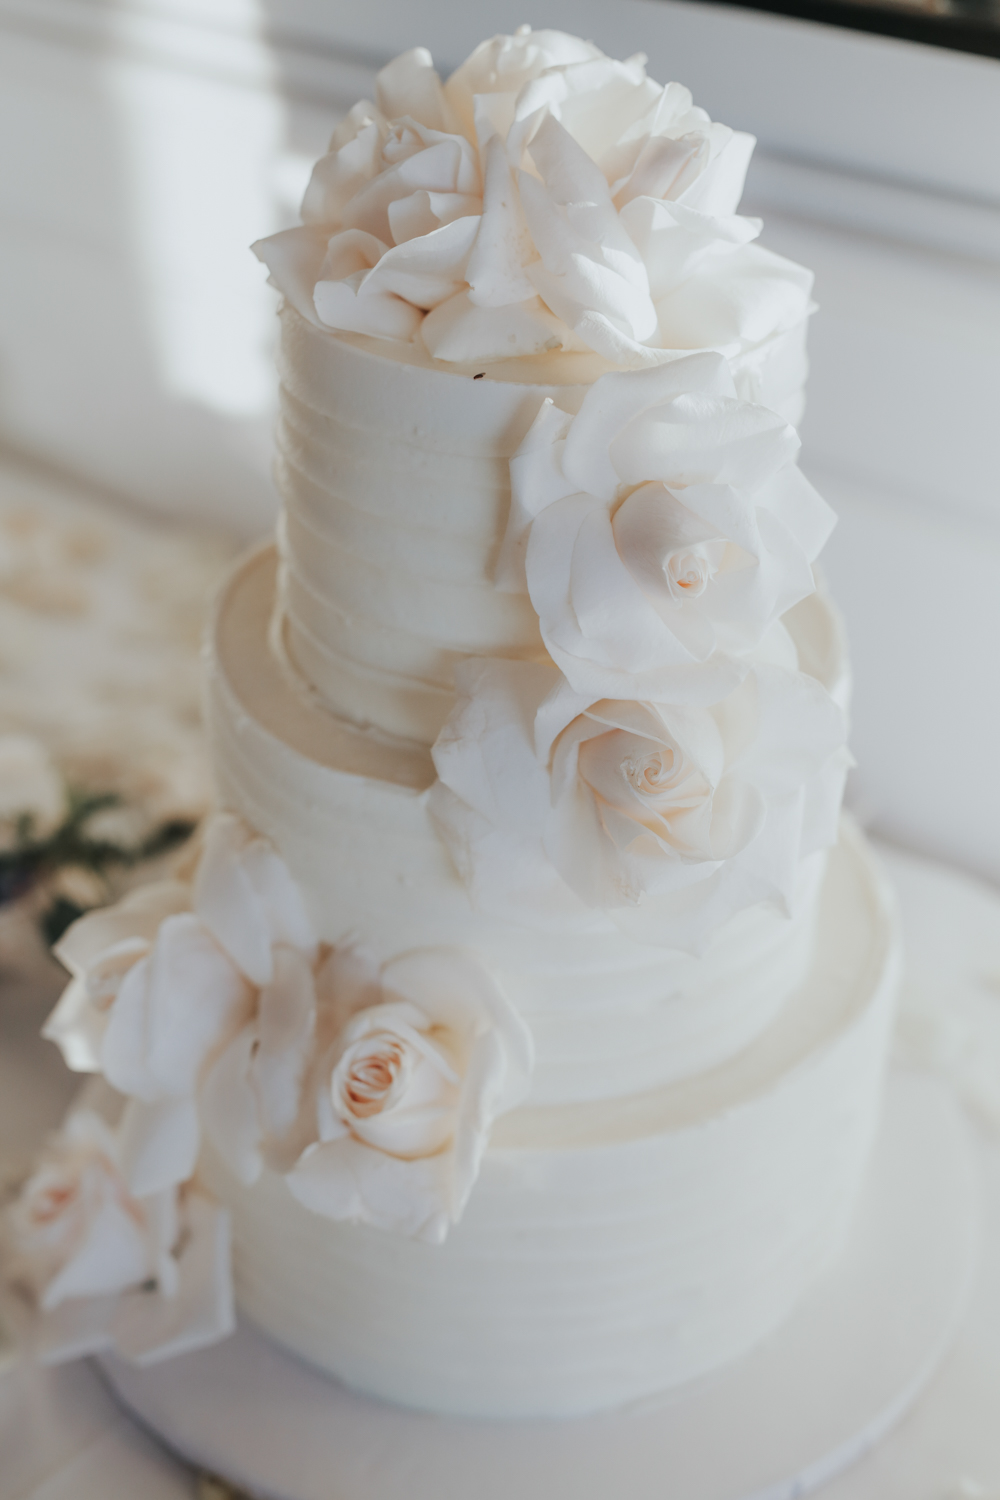 All white wedding cake decorated with roses was a perfect fit for the wedding